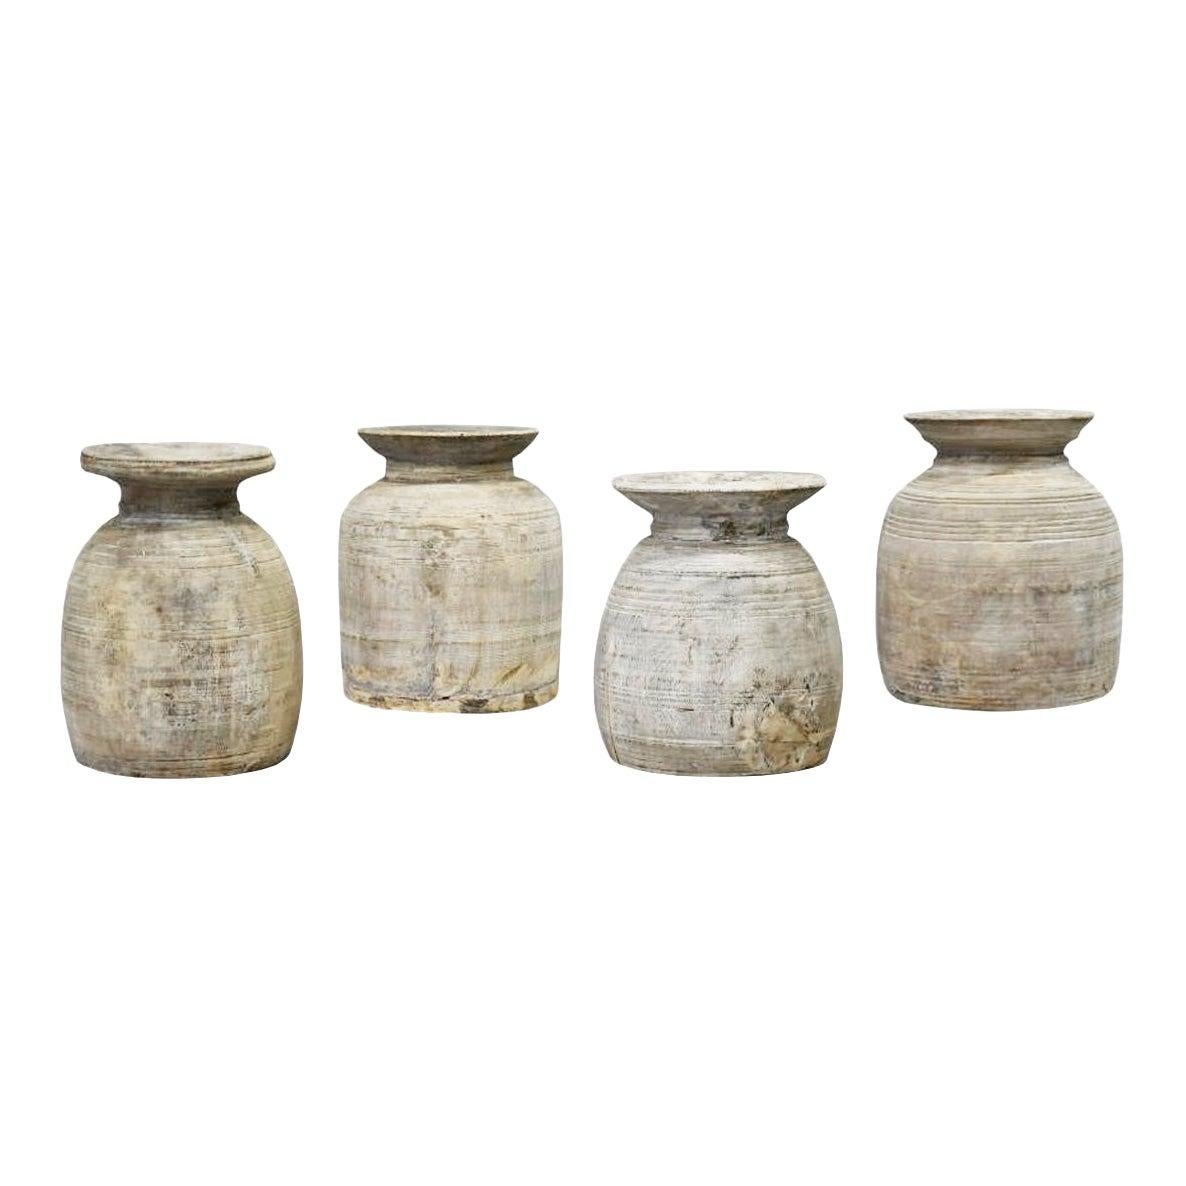 A beautiful set of four turned wood pot vases. Each one is uniquely made and they vary in 14